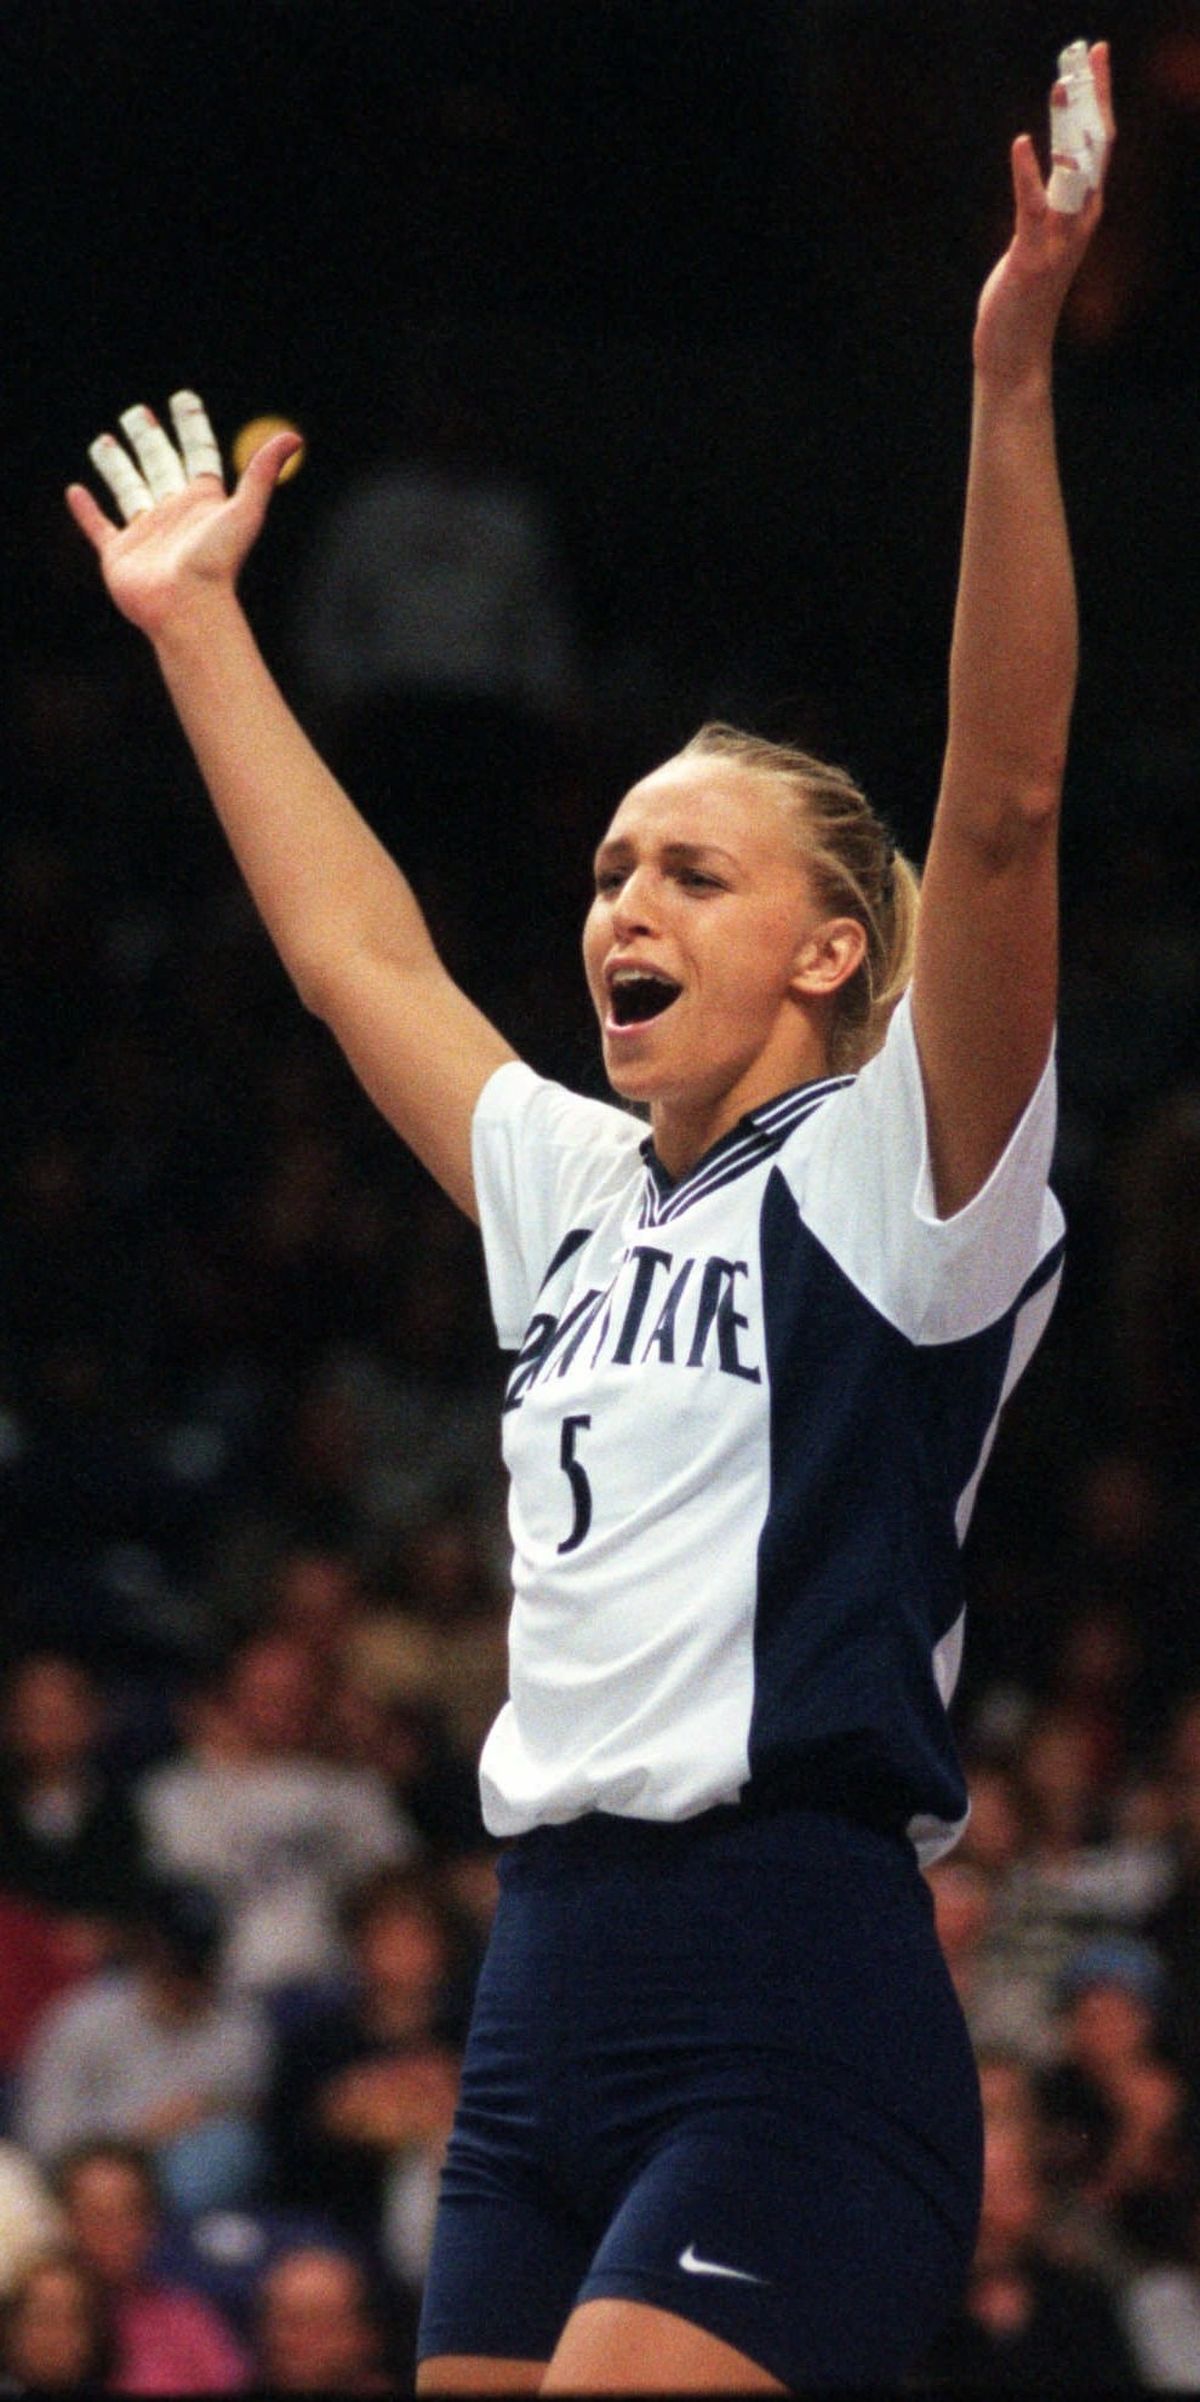 1997 In an event that helps cement the Arena as a suitable site for major competitions, Terri Zemaitis and her Penn State teammates fall to Stanford in a five-set championship match in the NCAA volleyball Final Four. (File)